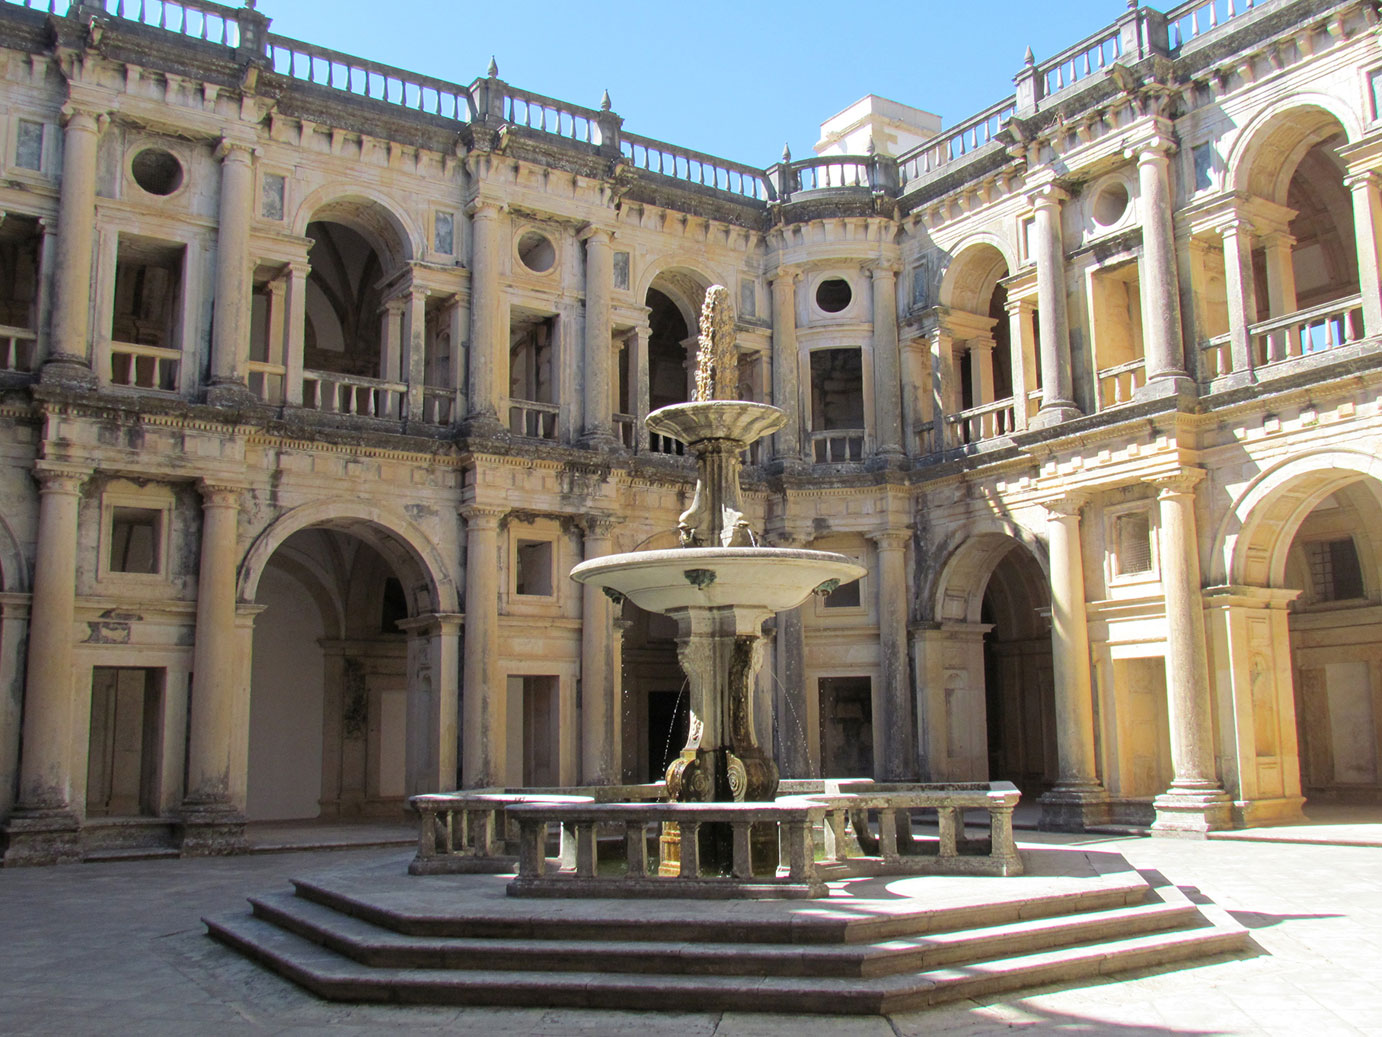 Sightseeing Tours in the Center of Portugal - Turismo de Portugal - Gowestours - Go West Tours